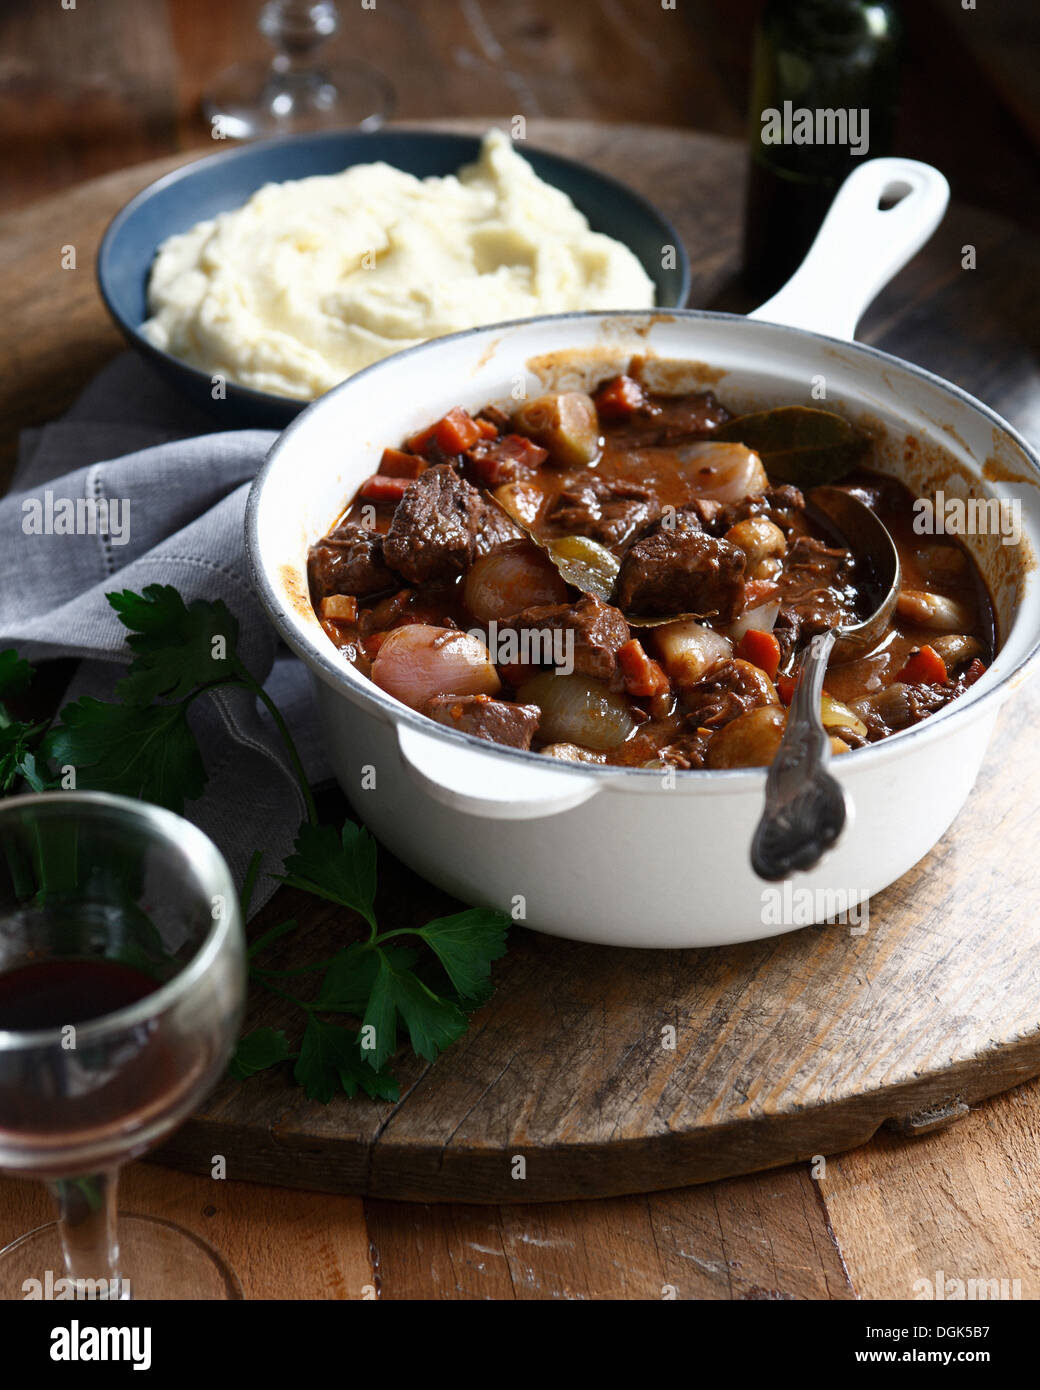 Beef daube in casserole dish with bowl of mashed potatoes Stock Photo